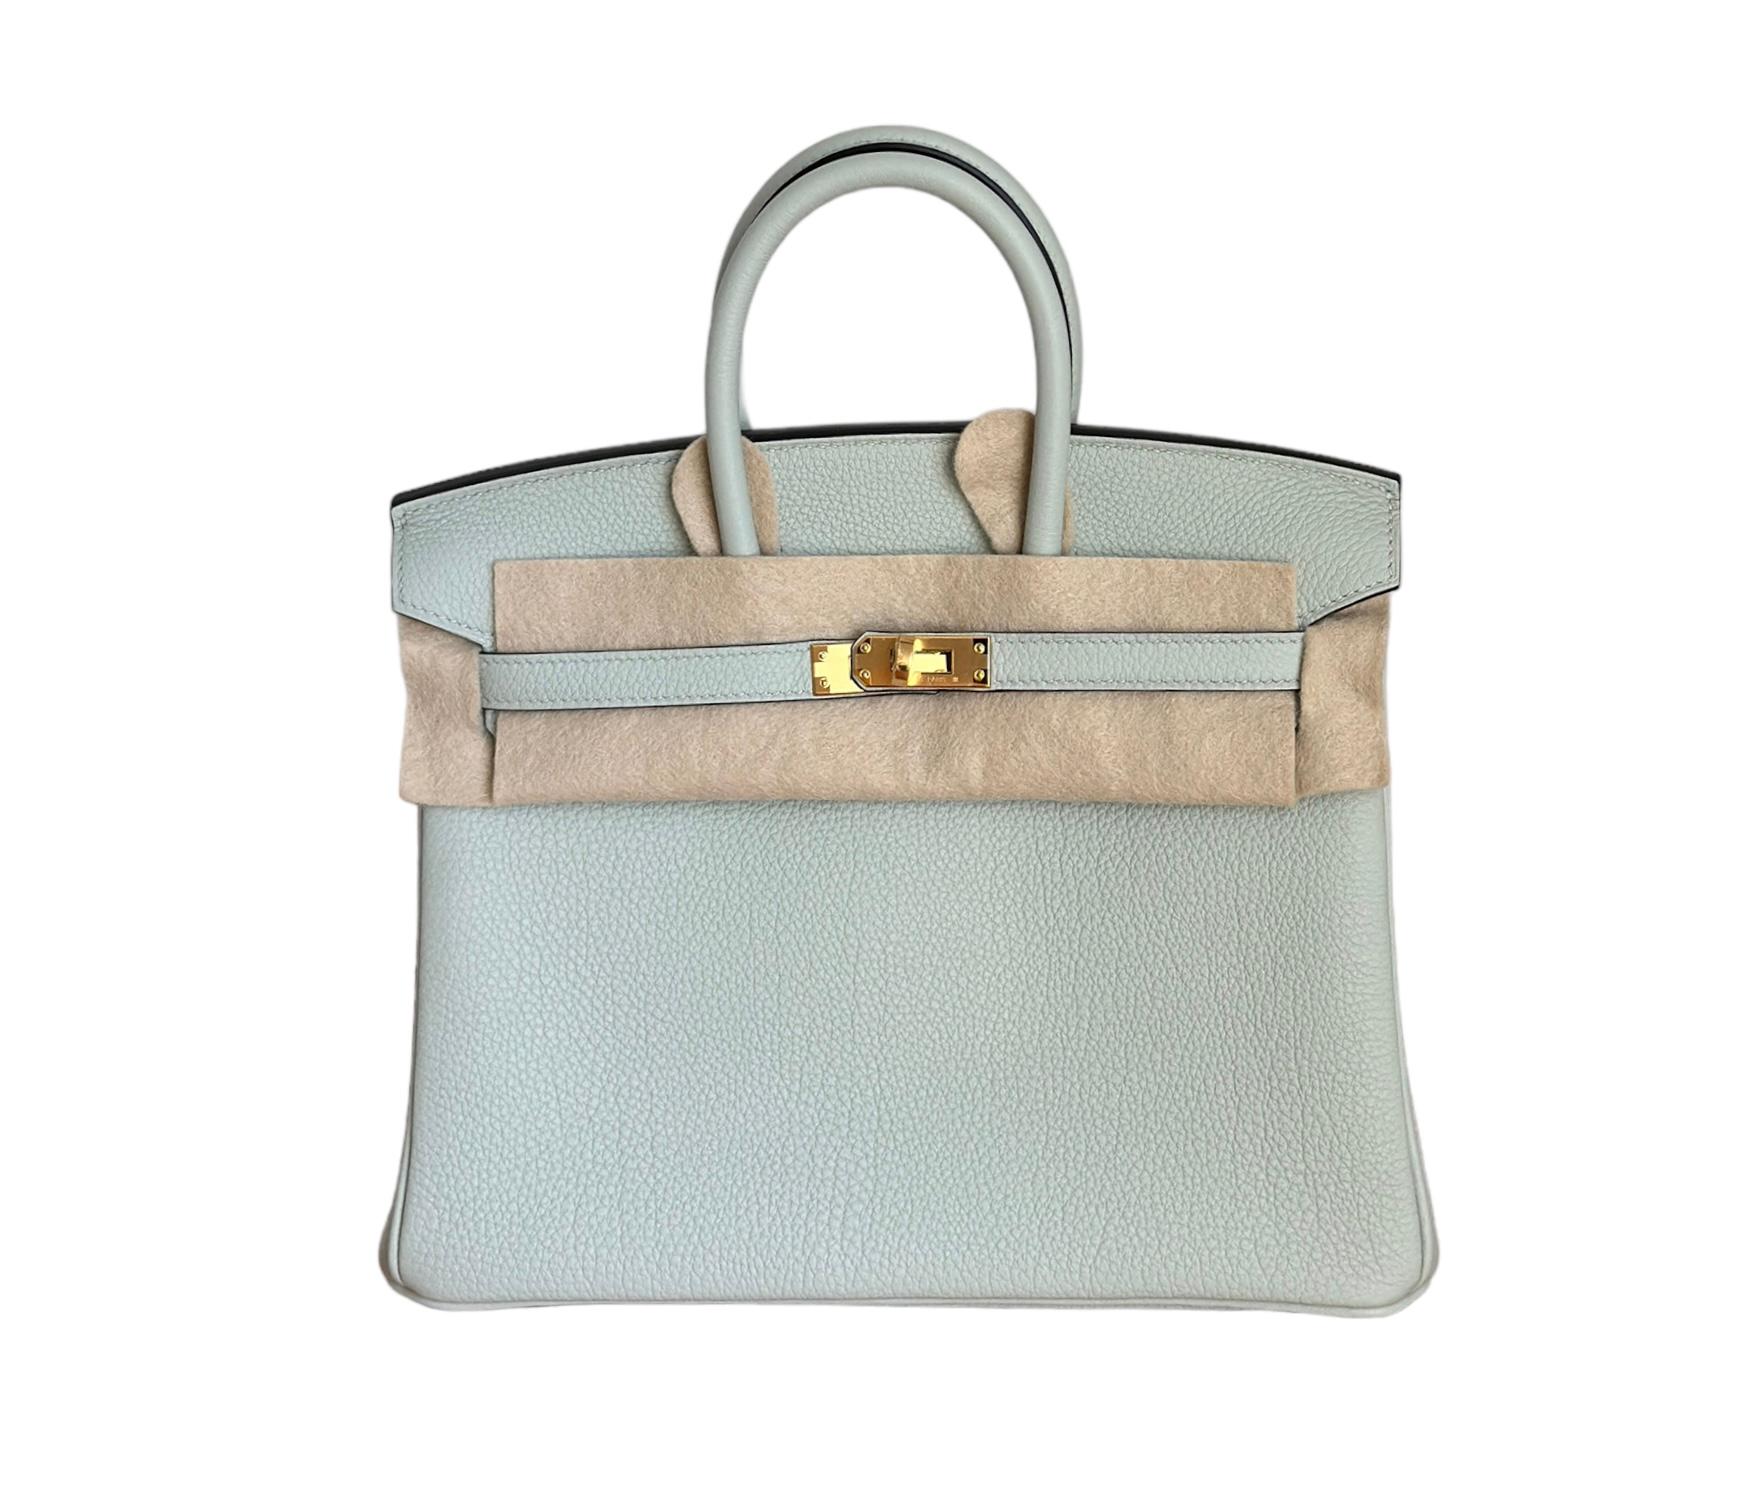 Hermès Birkin 25 Gris Neve Togo Gold Bag In New Condition For Sale In West Chester, PA